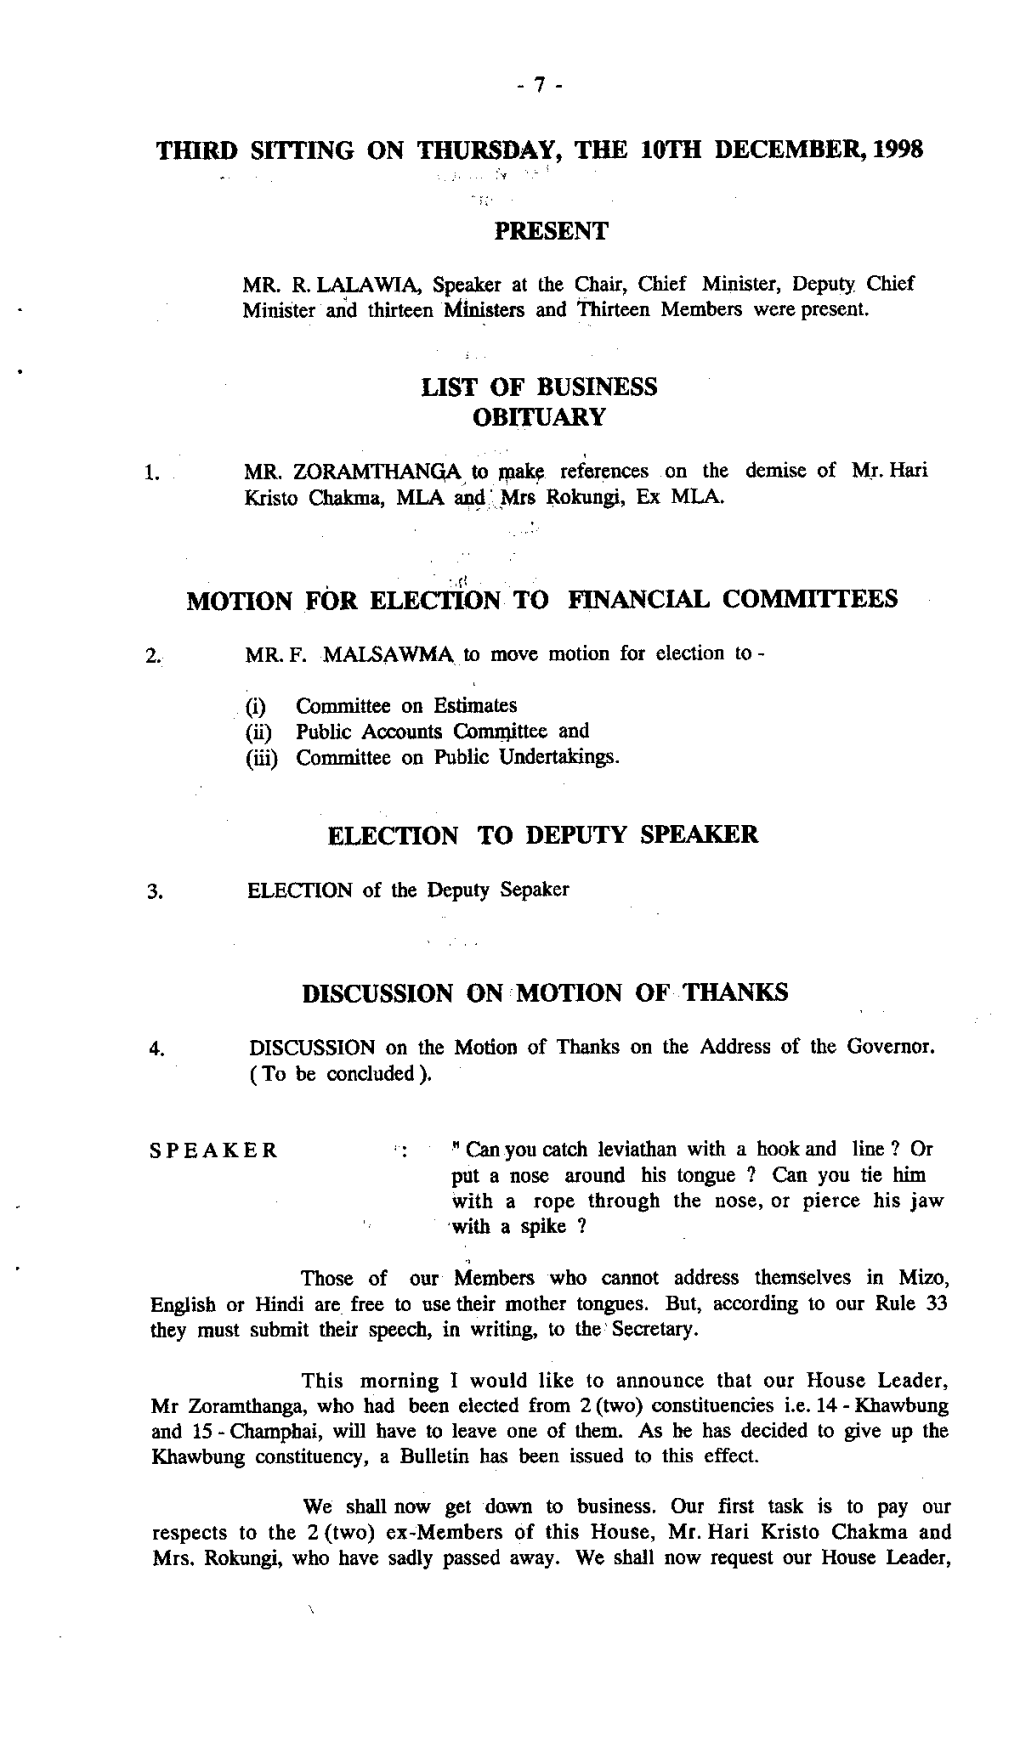 Tidrd Sitting on Thursday, the 10Th December, 1998 Present List of Business Obituary Motion for Election to Financial Committees